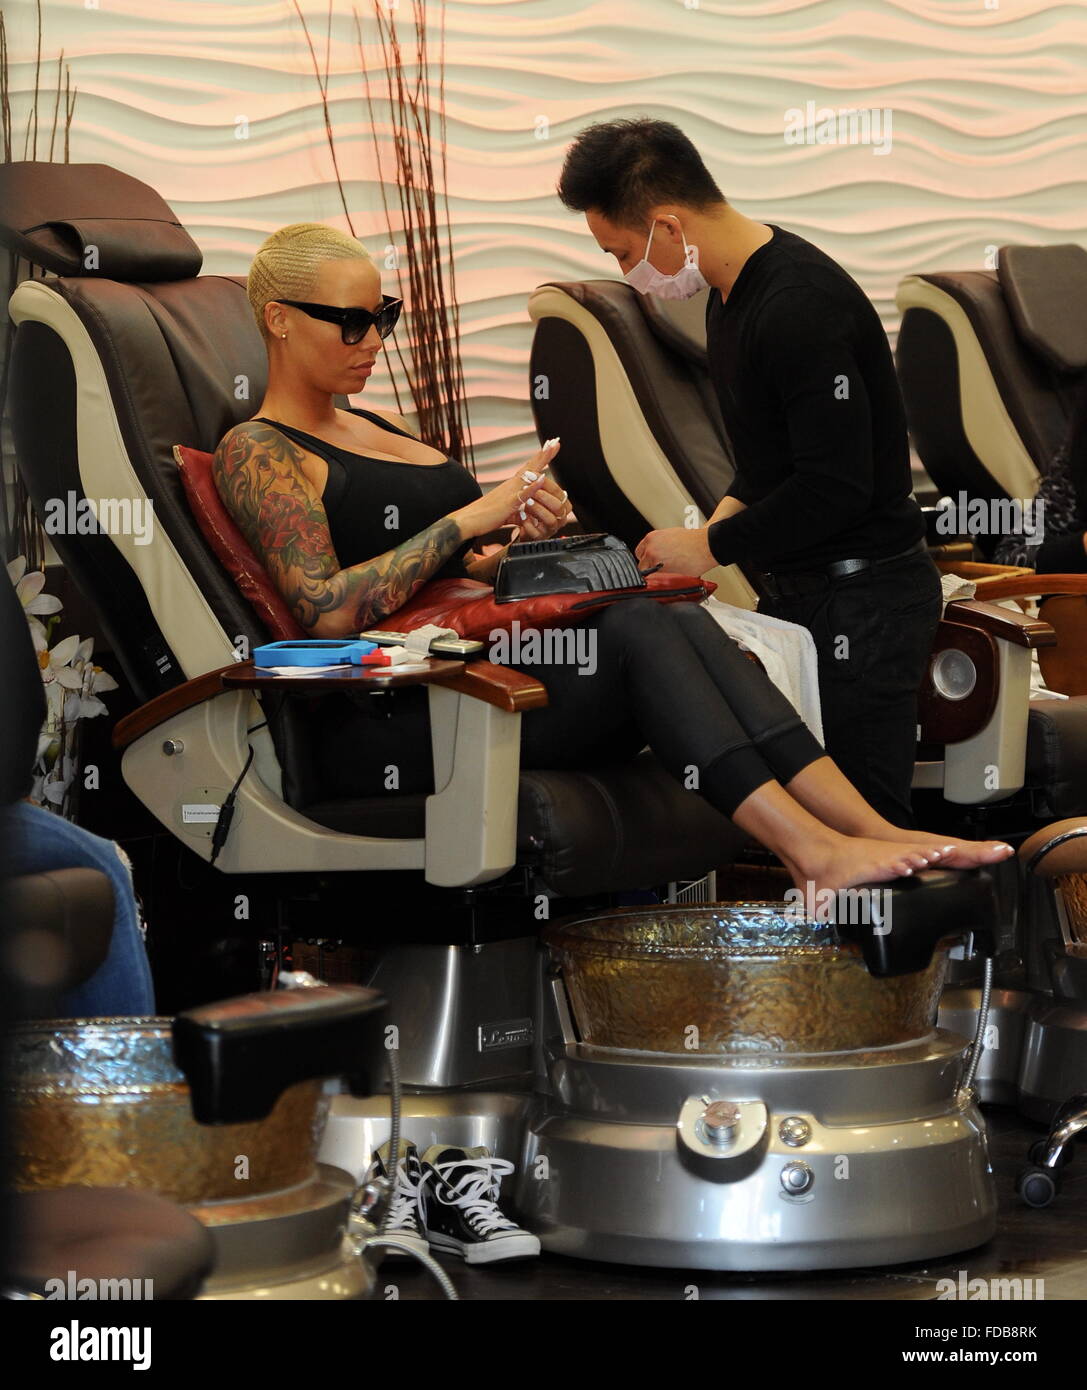 Amber Rose Spends Time With Her Mom And Got Their Nails Done At